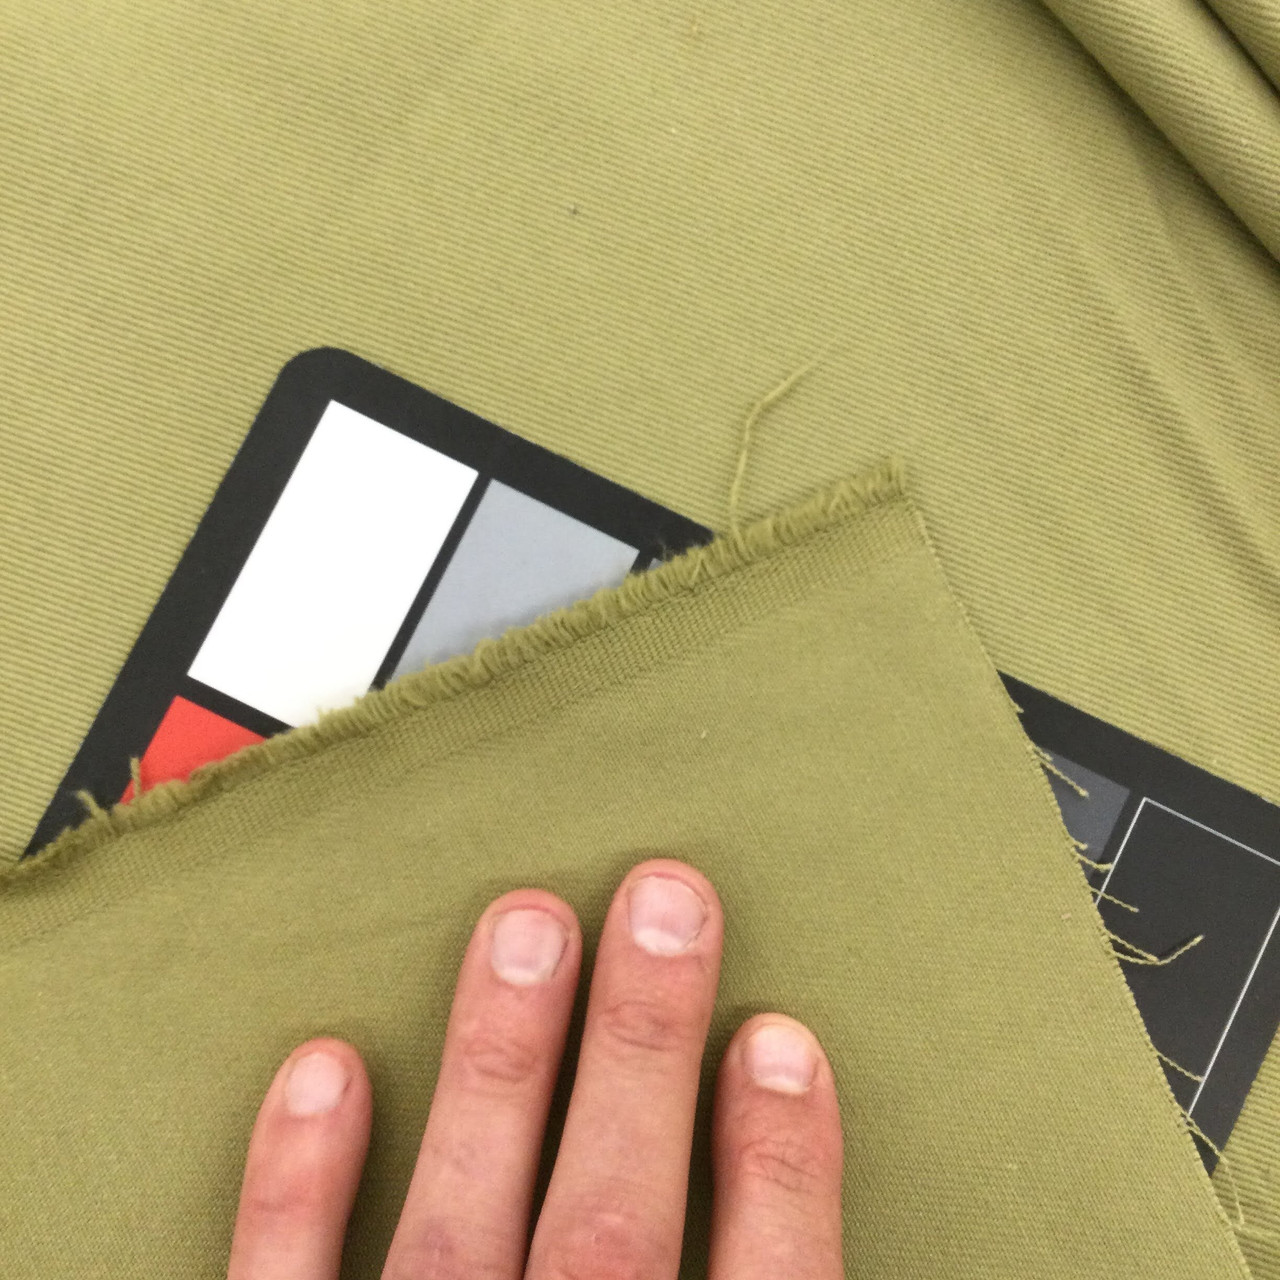 Solid Olive Green, Cotton Twill Fabric, 8 oz., Apparel / Slipcovers /  Bedding, 54 Wide